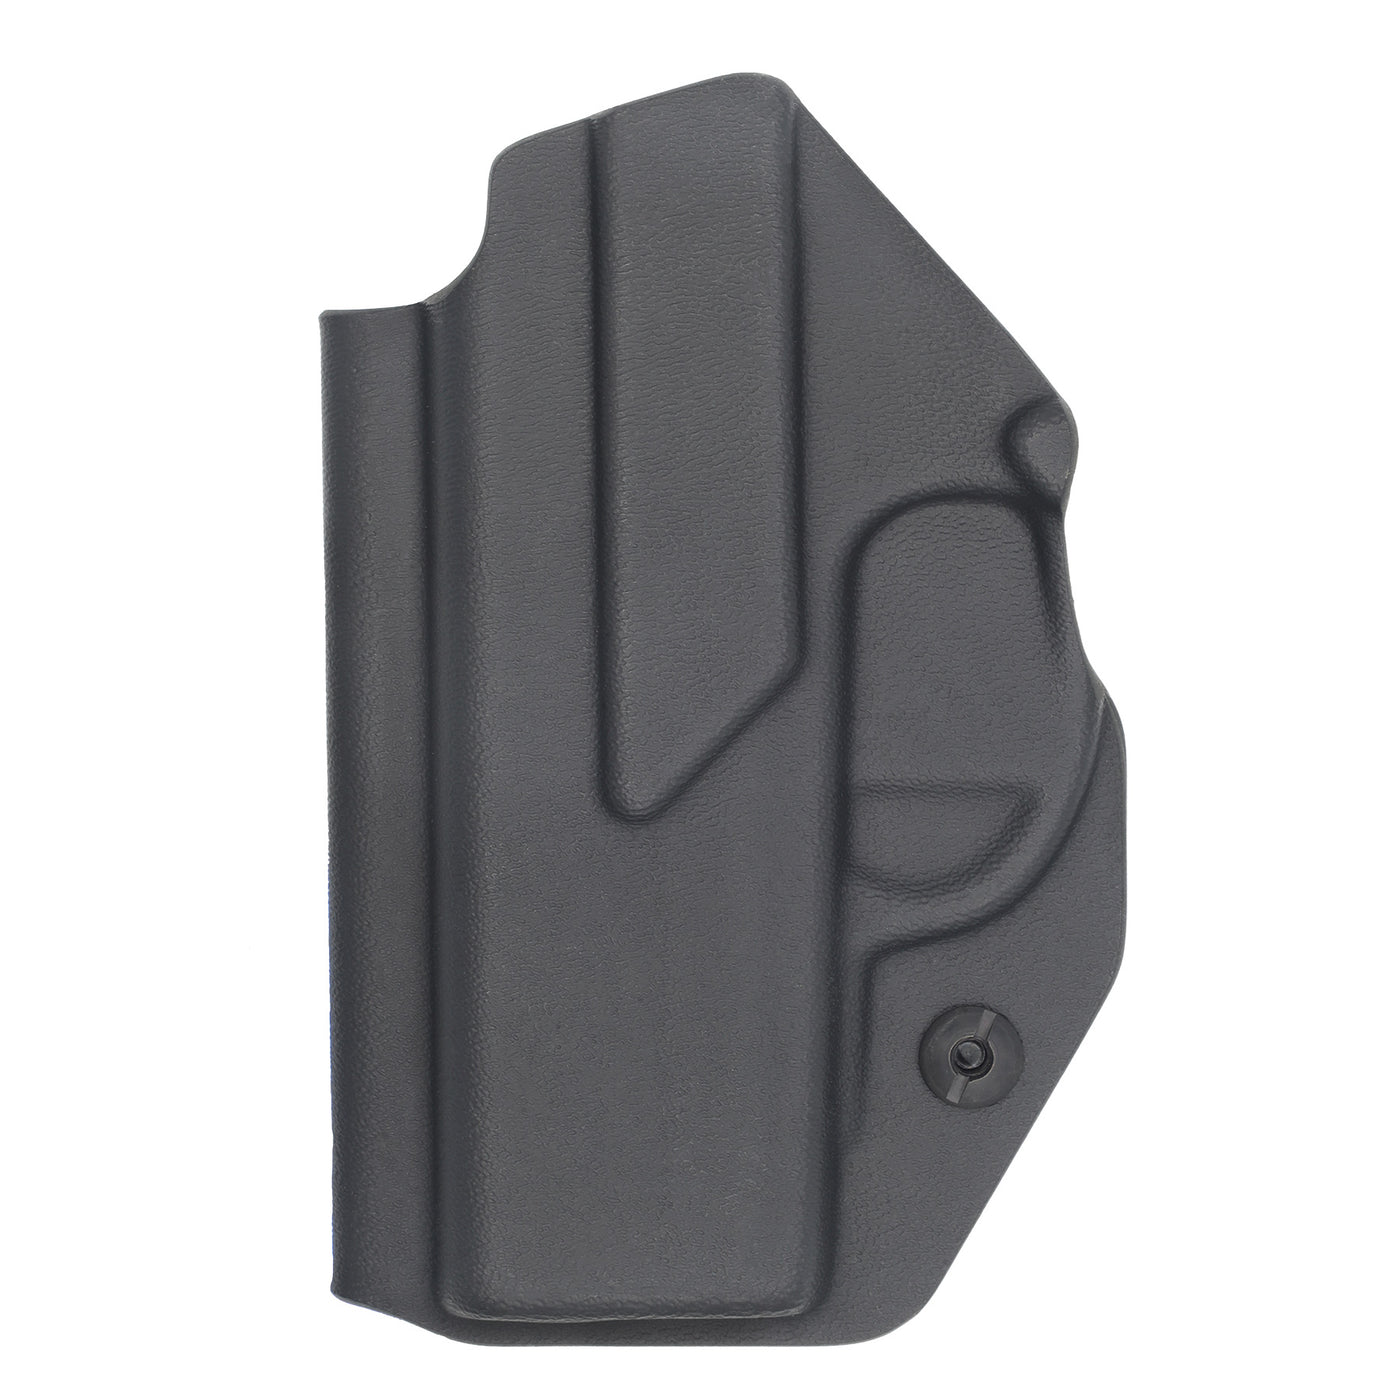 C&G Holsters quick ship Covert IWB kydex holster for Sig P290 in black